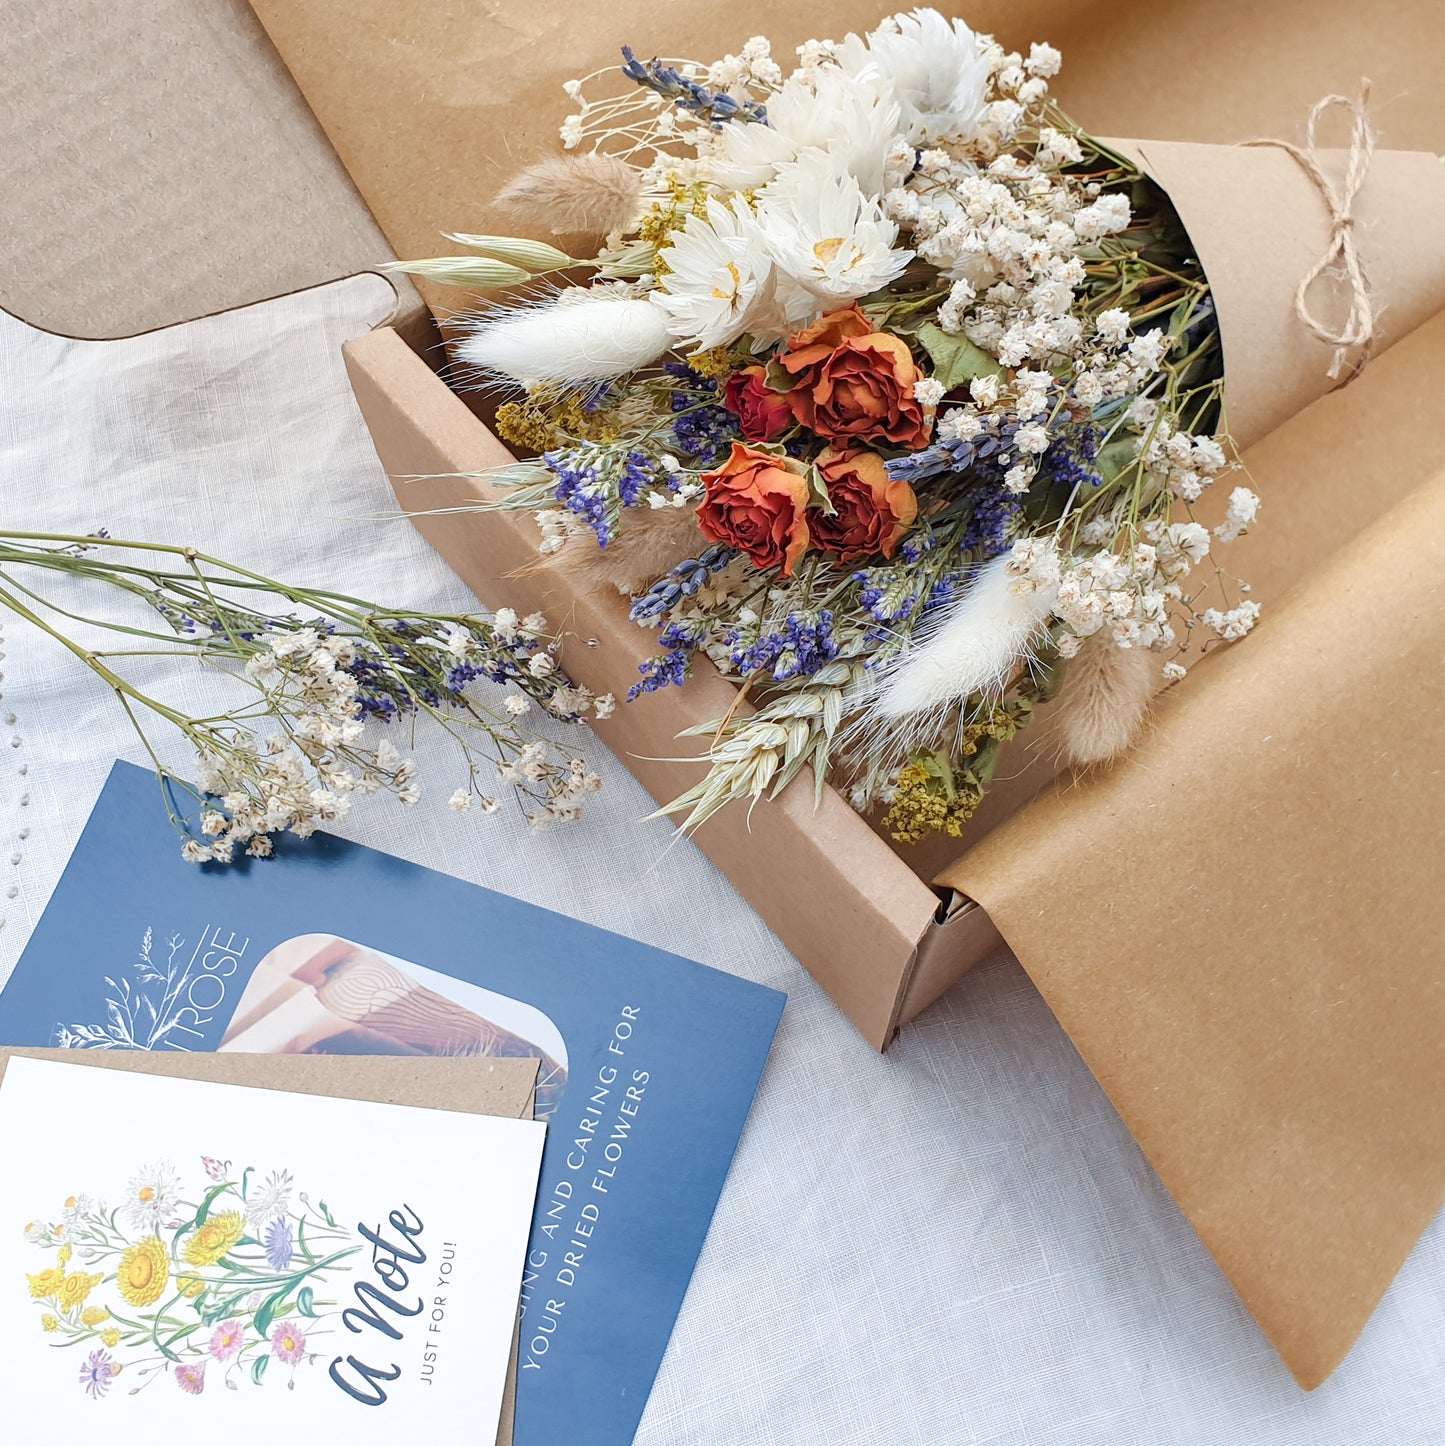 A close up of the dried flower bouquet wrapped sits in its packaging box with a pretty recycled tissue layer. It has small orange roses, white daisies with yellow centres, lilac sea lavender and pretty white gypsophila among other grasses and fillers. In the background you can see the optional gift card and instructions for caring for dried flowers. You can see the pretty colouration of the orange roses, fading from a vibrant tomato red to orange to a golden apricot shade at the base.